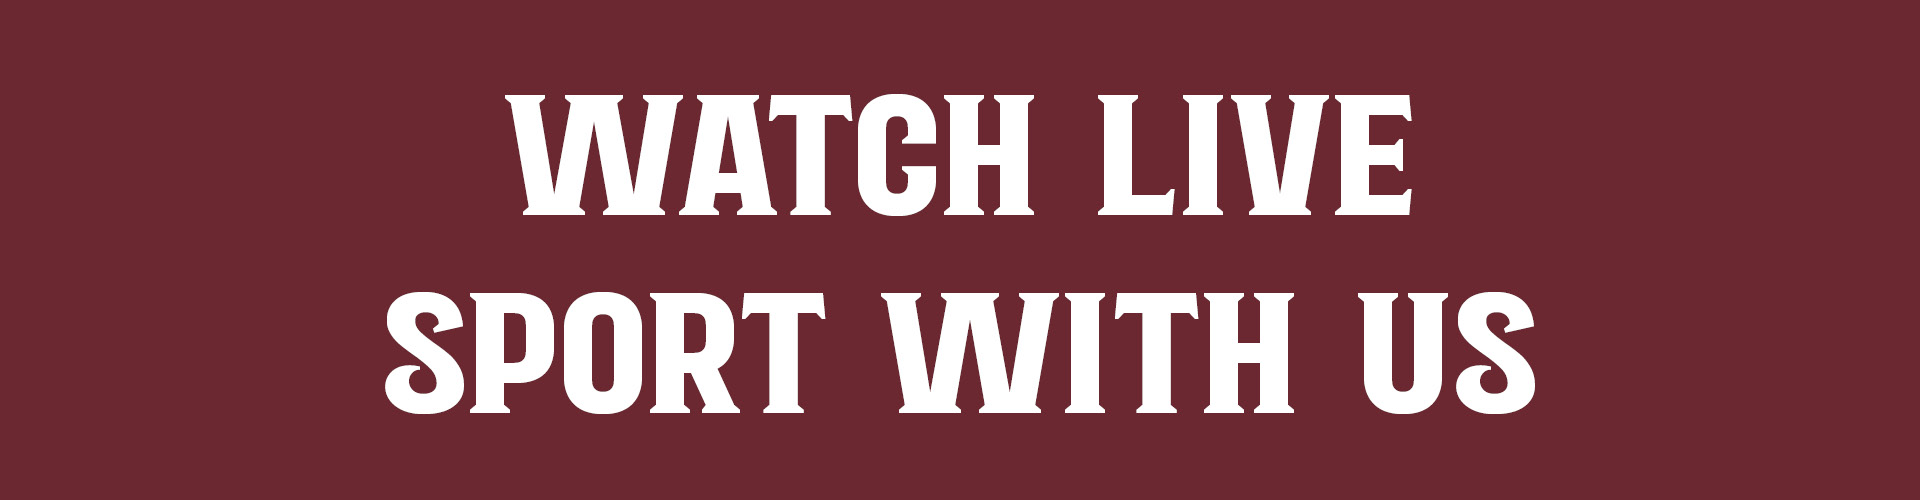 Watch live sport in Bicester at The Lamb Inn pub